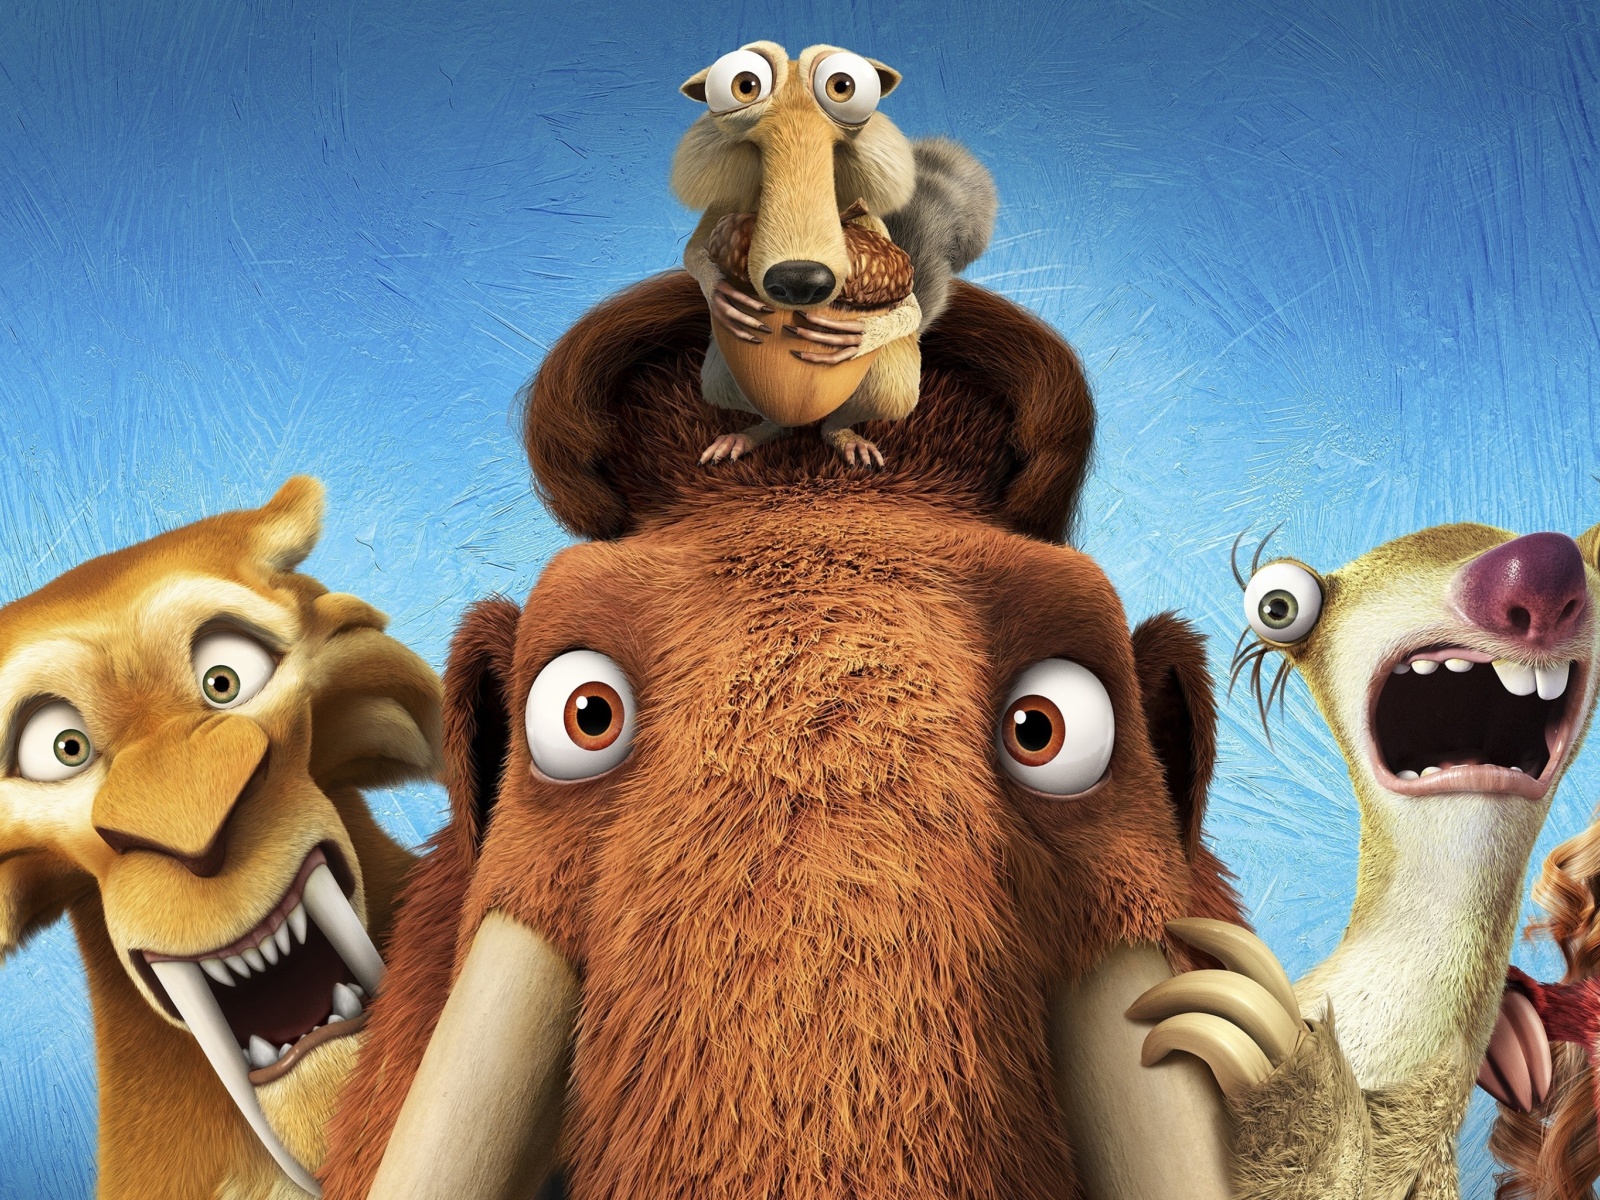 Das Ice Age 5 Collision Course with Diego, Manny, Scrat, Sid, Mammoths Wallpaper 1600x1200